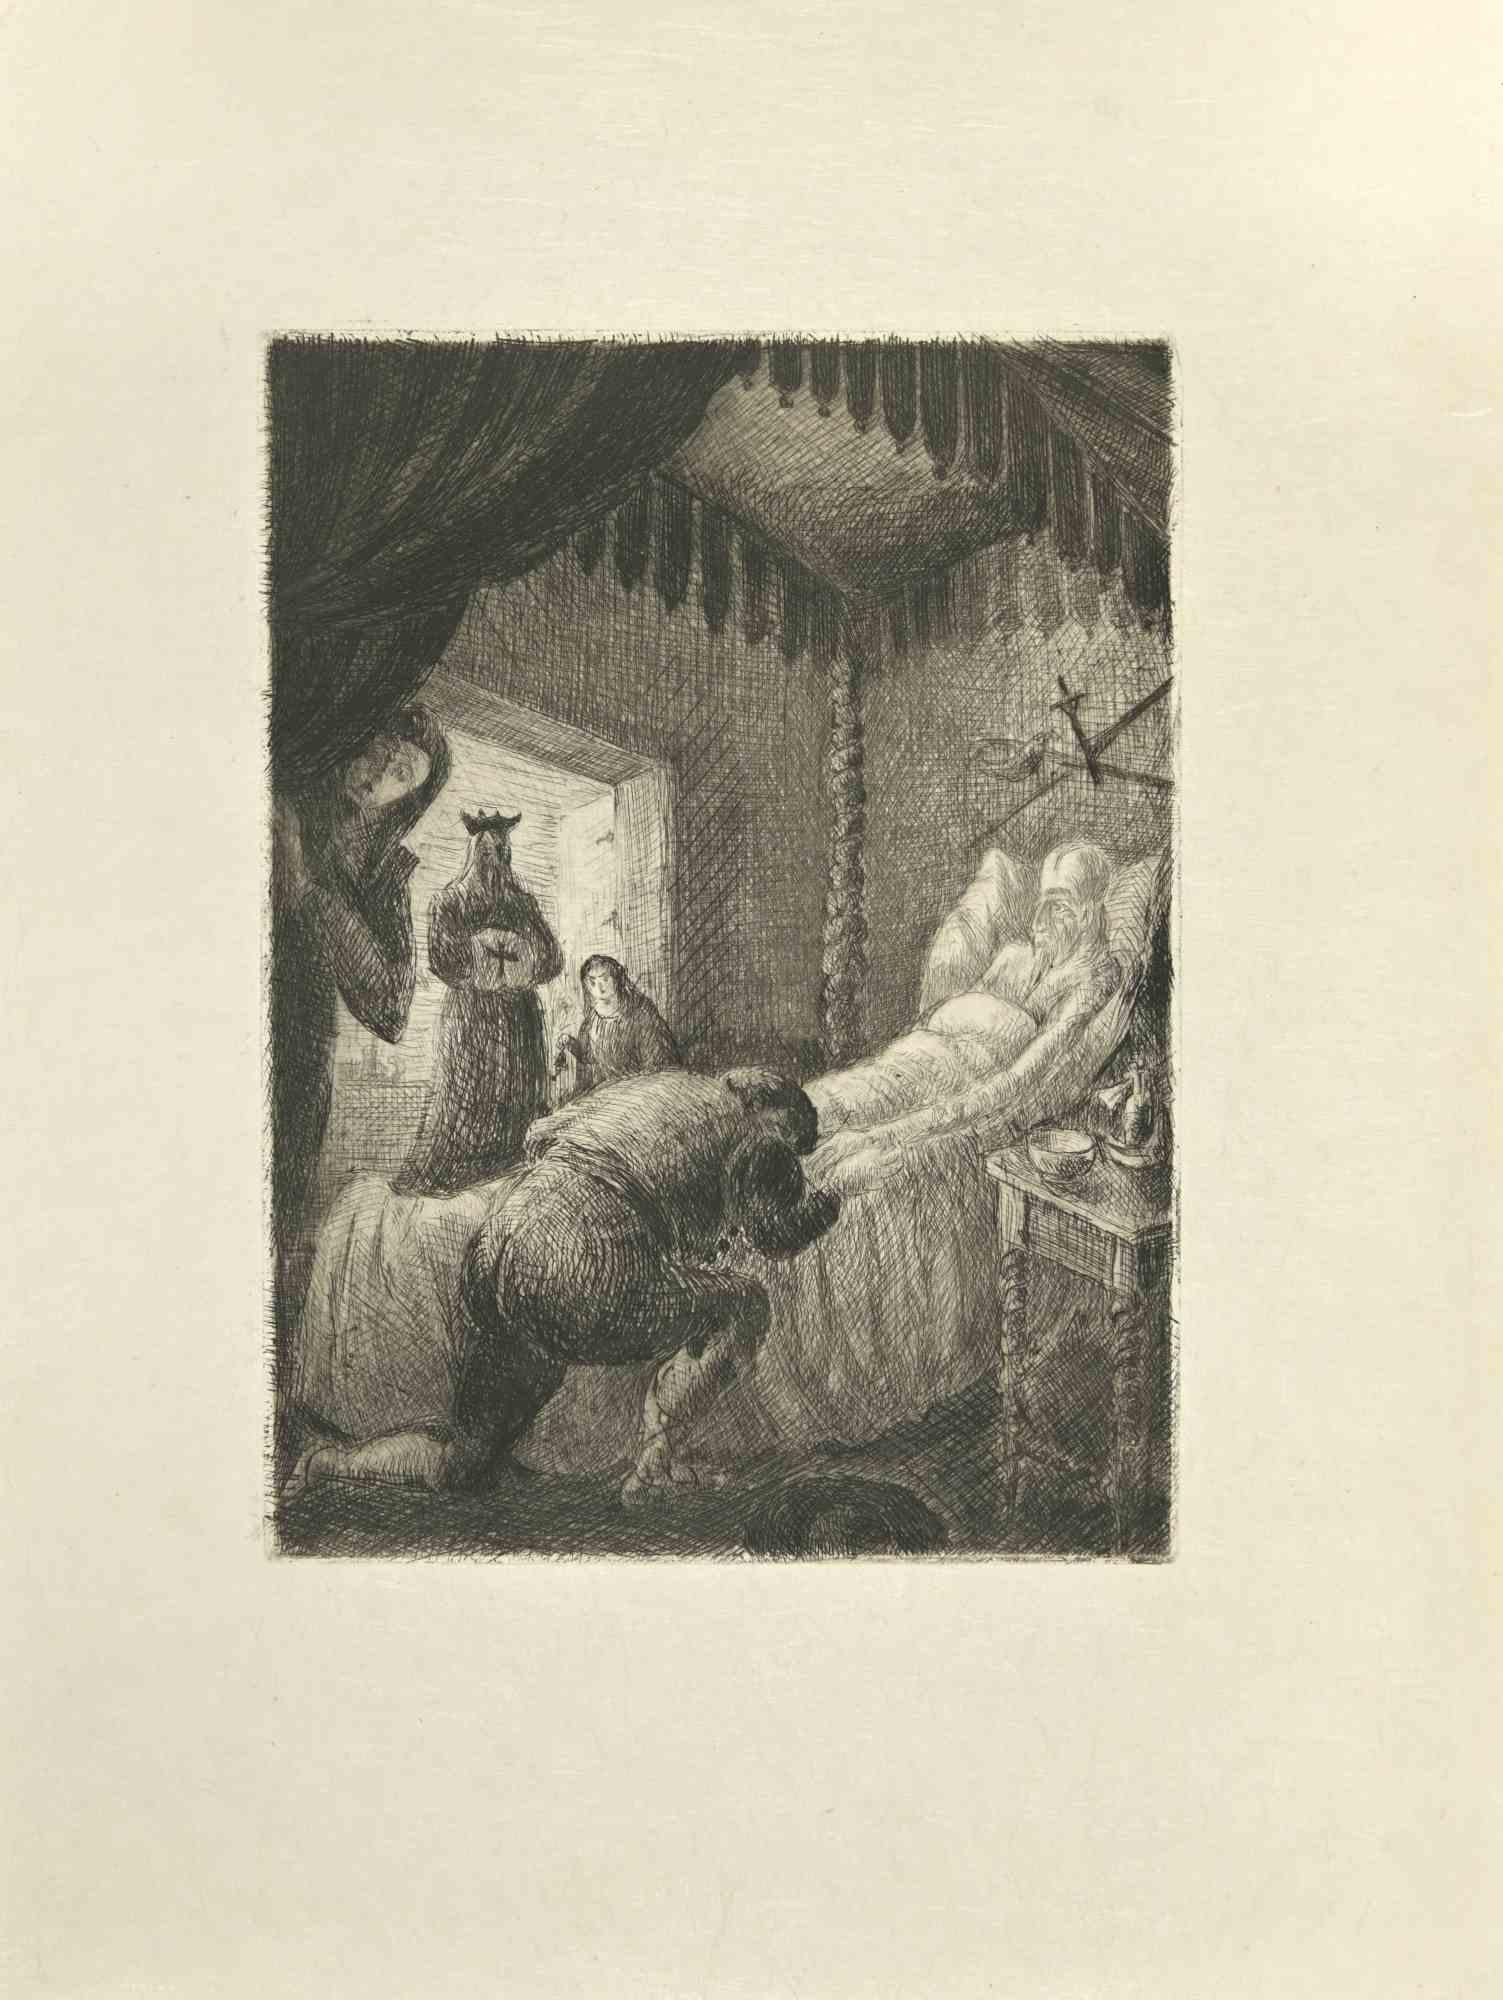 Don Quixote  in The Bed is an etching and drypoint print on ivory-colored Japanese paper, realized by Wladyslaw Jahl in 1951.

It belongs to a limited edition of 125 specimens.

Good conditions.

The artwork represents a visual scene from Don